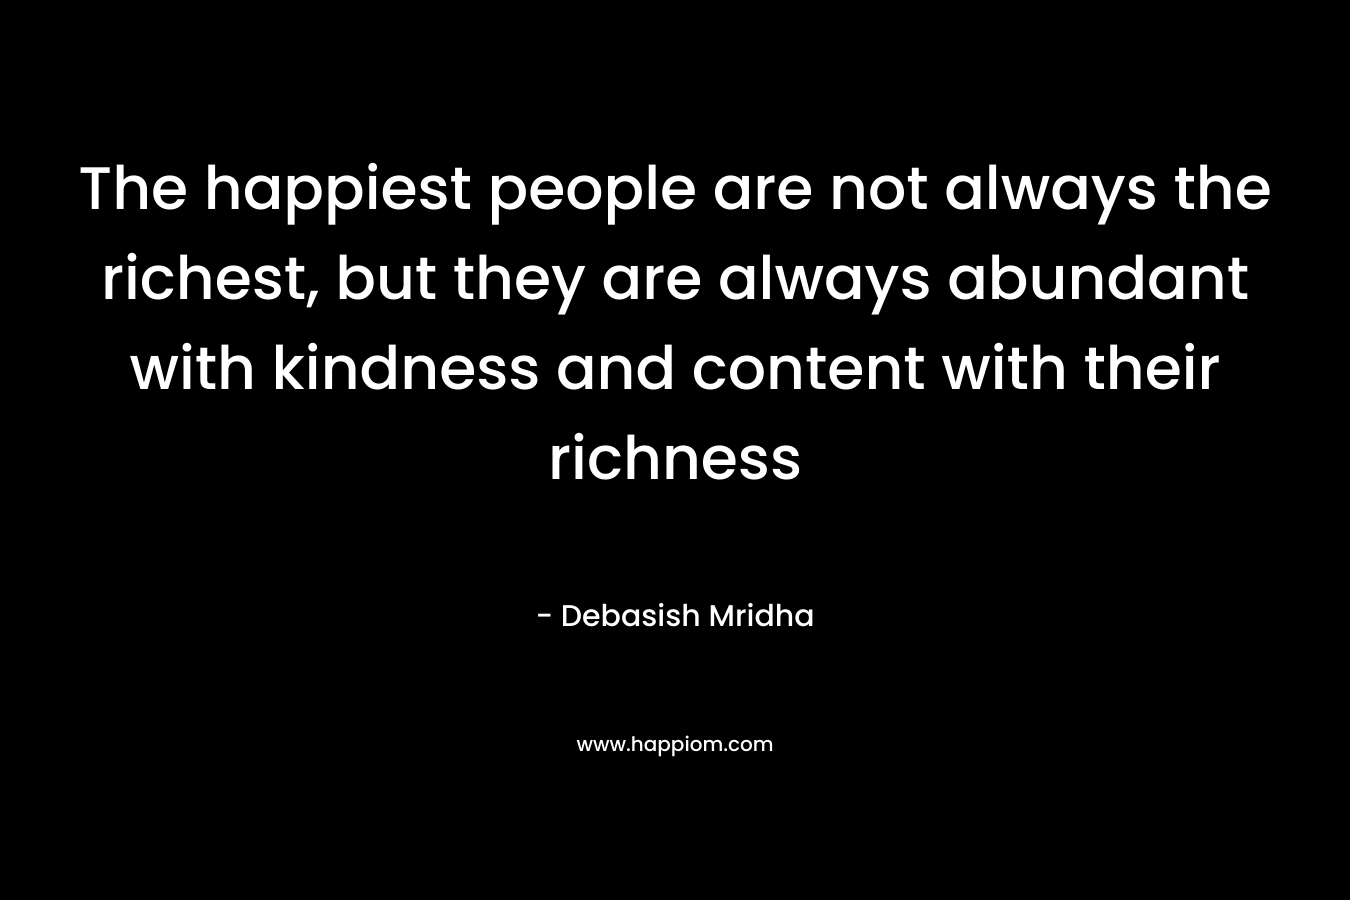 The happiest people are not always the richest, but they are always abundant with kindness and content with their richness